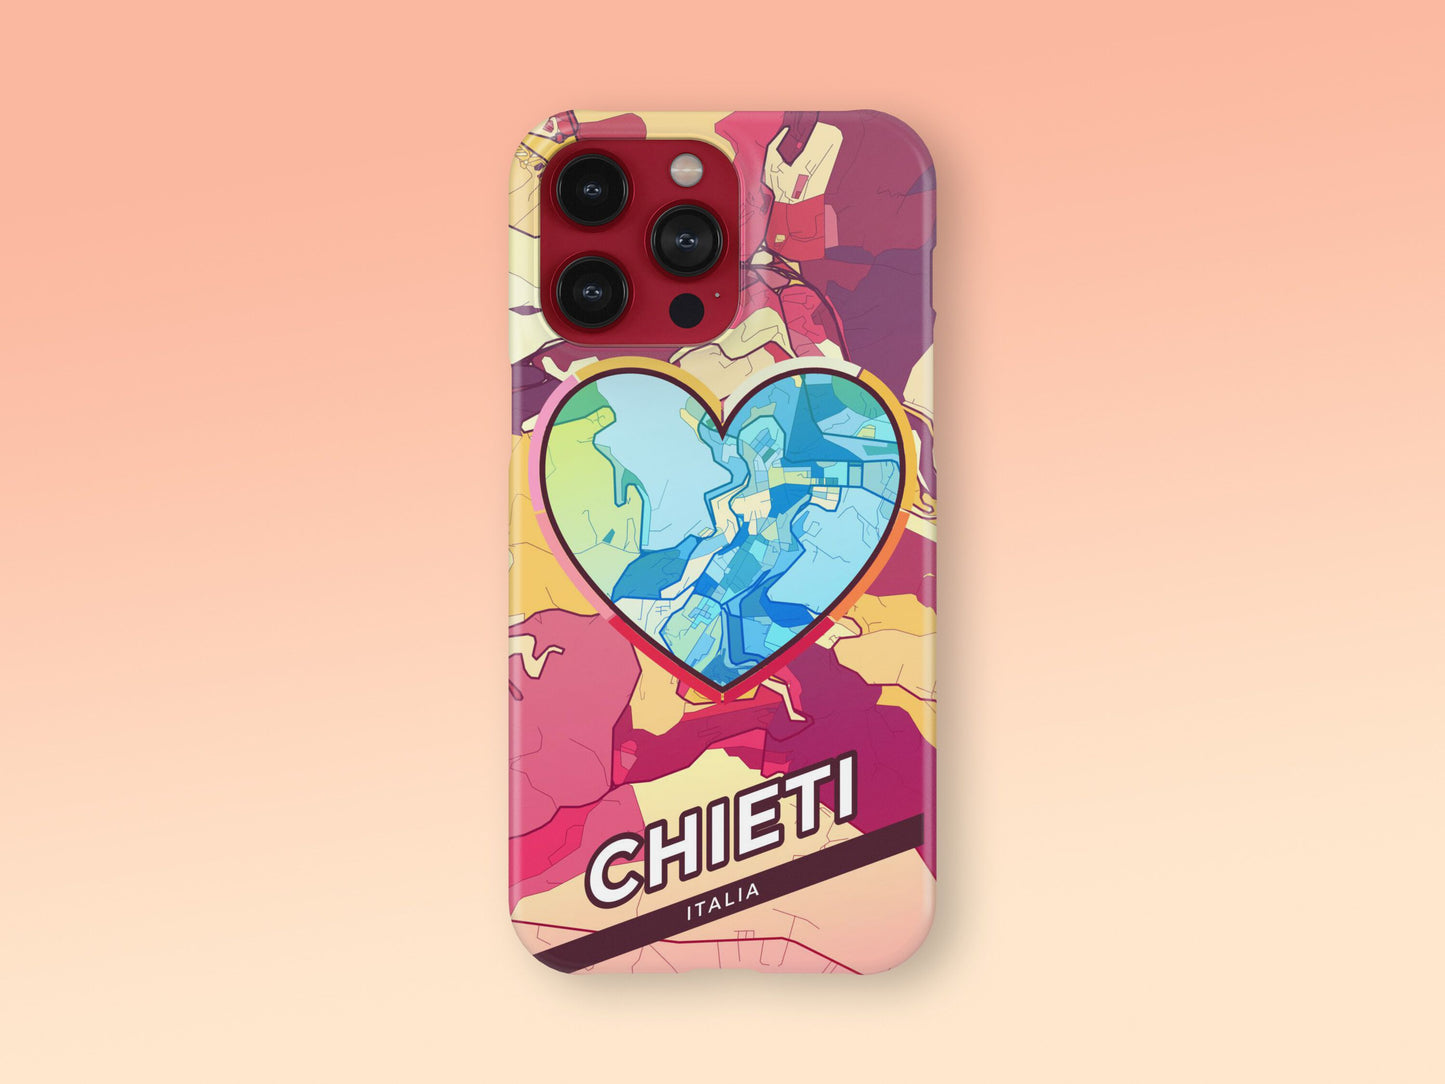 Chieti Italy slim phone case with colorful icon. Birthday, wedding or housewarming gift. Couple match cases. 2